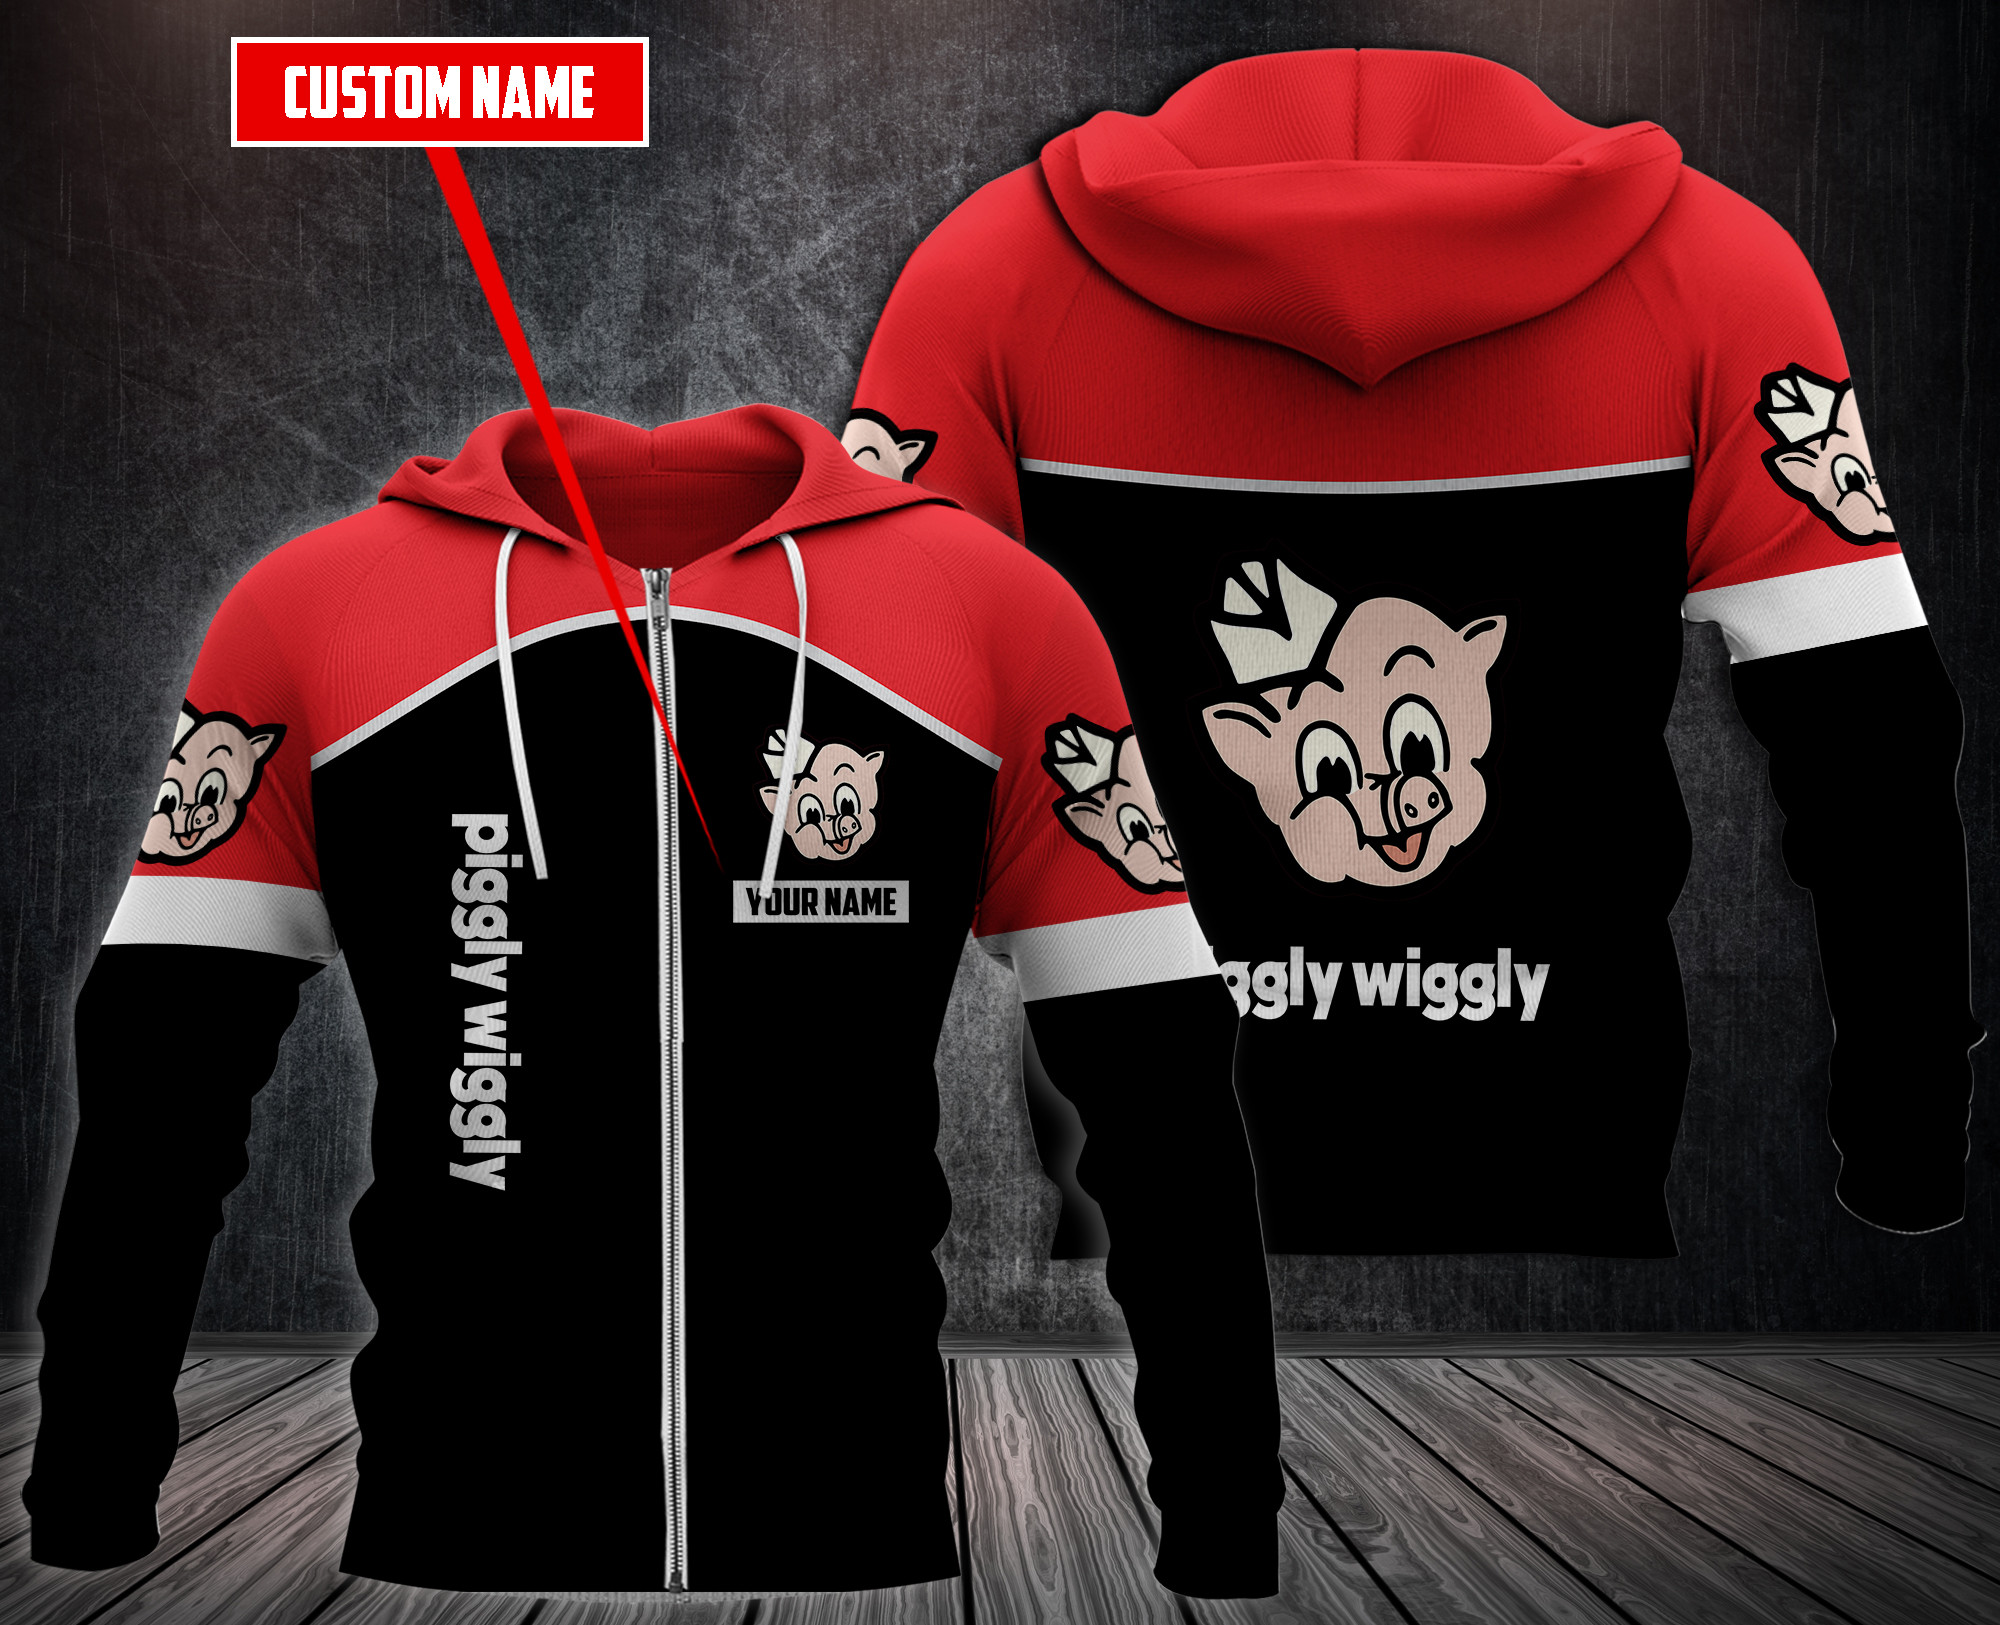 Choose the right hoodies for you on our boxboxshirt and ethershirt websites in 2022 43